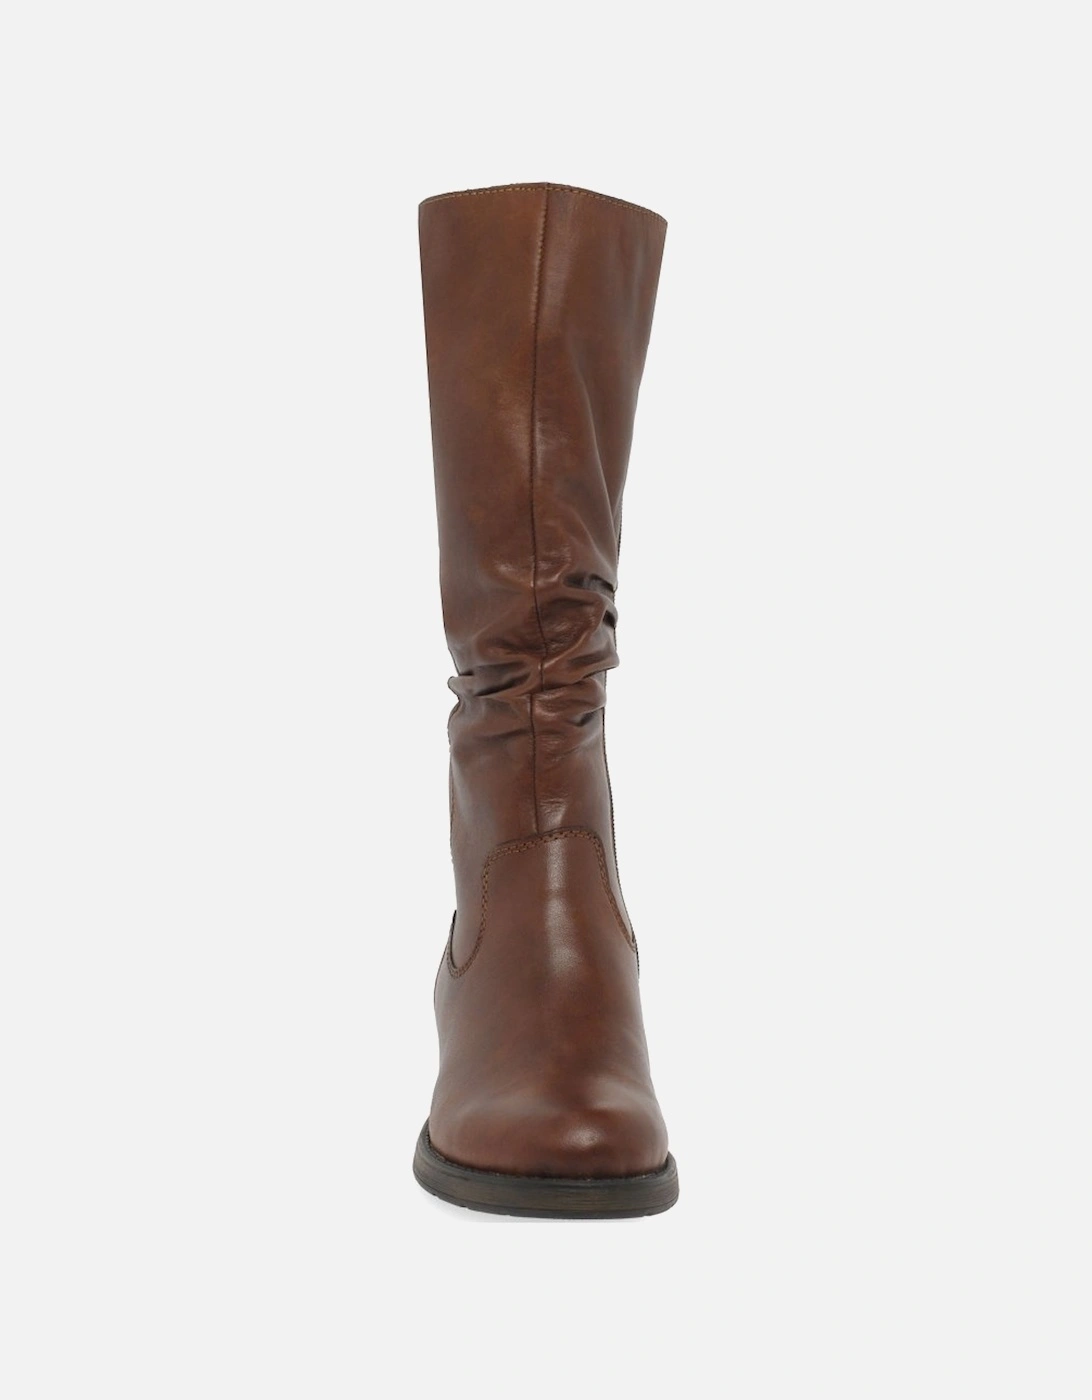 Chief Womens Calf Length Boots